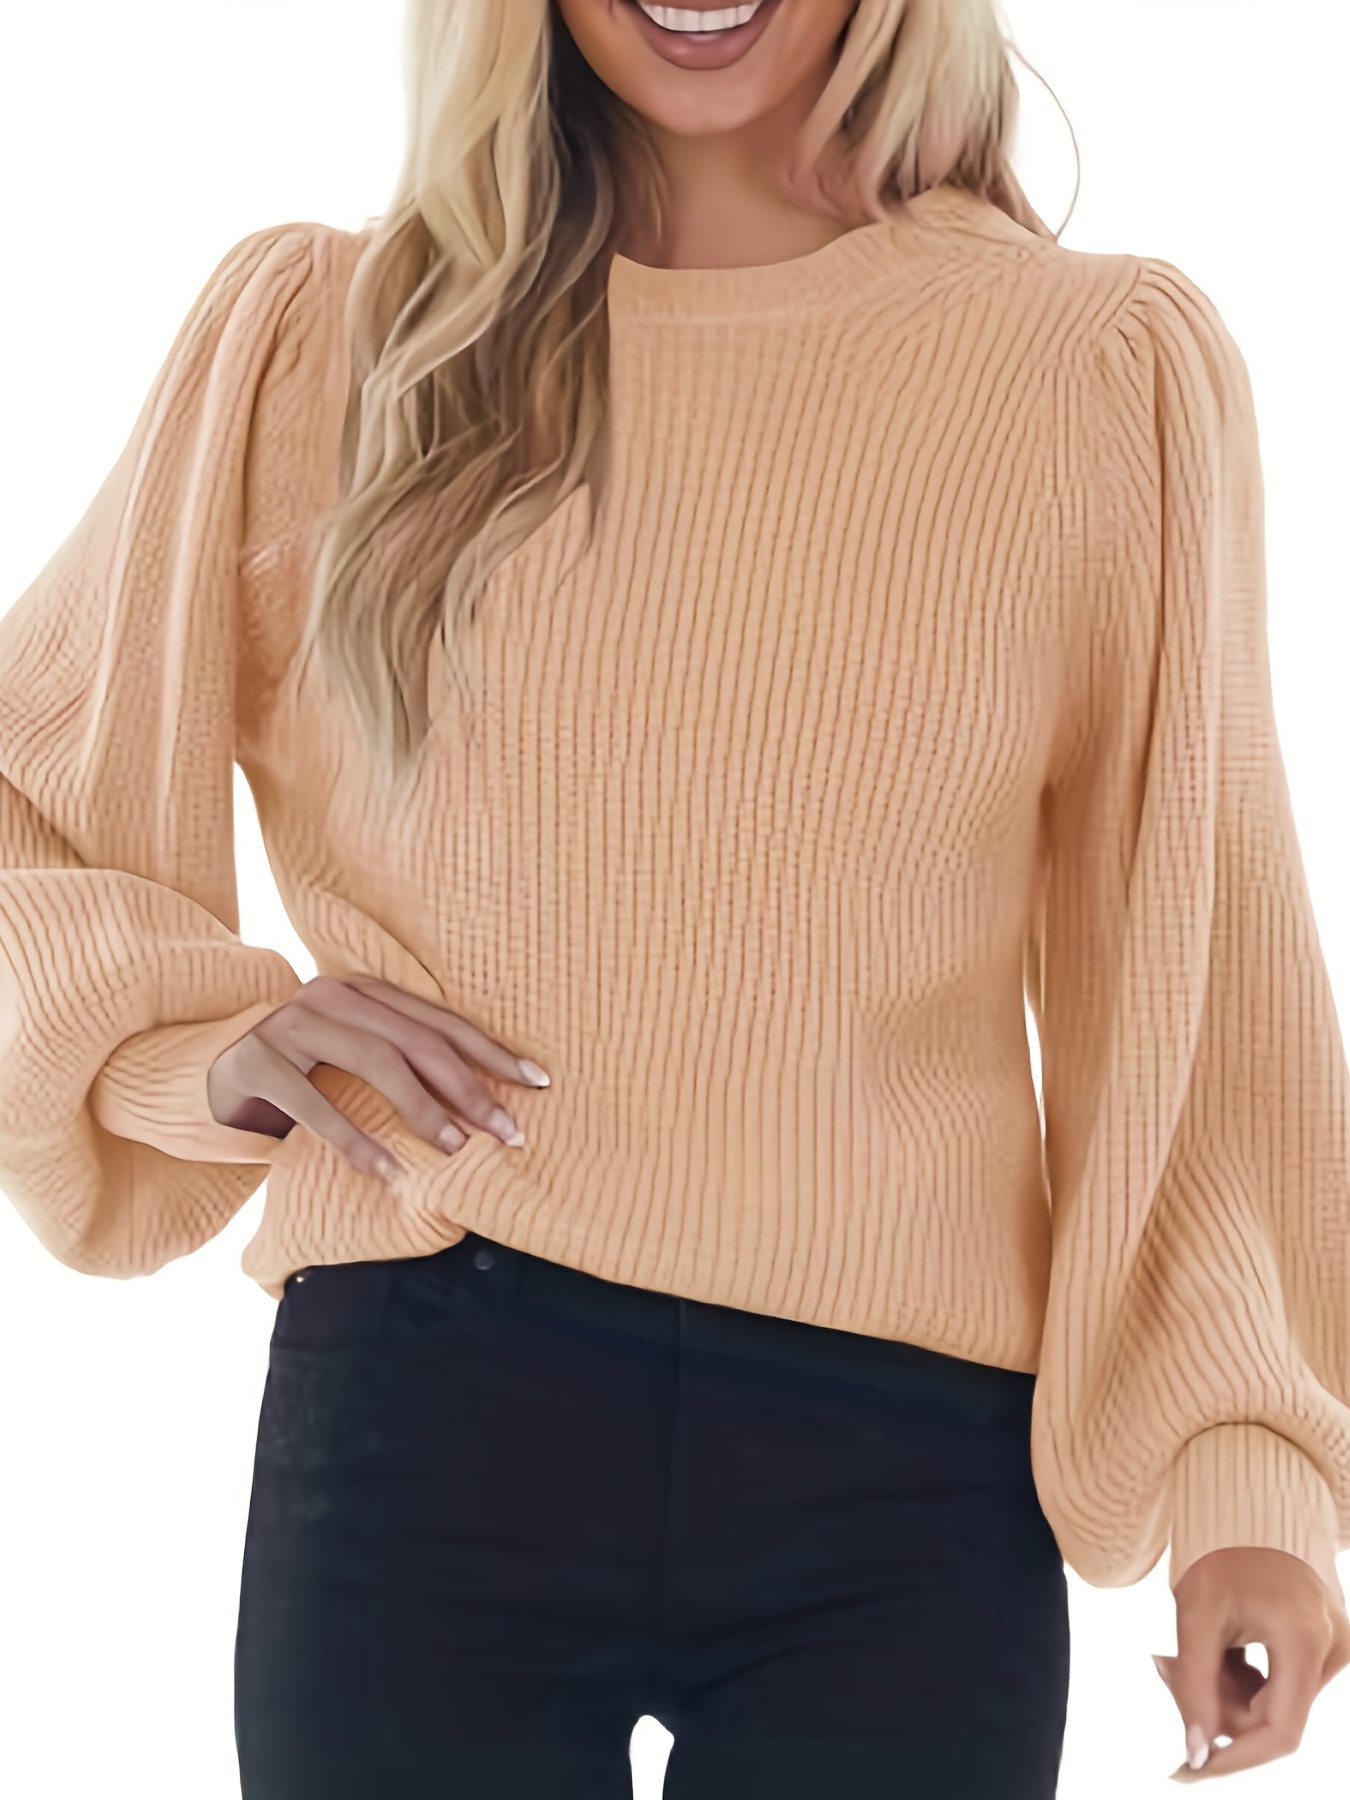 Sweet Puff Sleeve Sweaters Women Round Neck Tight Slim Short Pullovers  Female Long Sleeve Cozy Kobieta Swetry Pull Femme Hiver